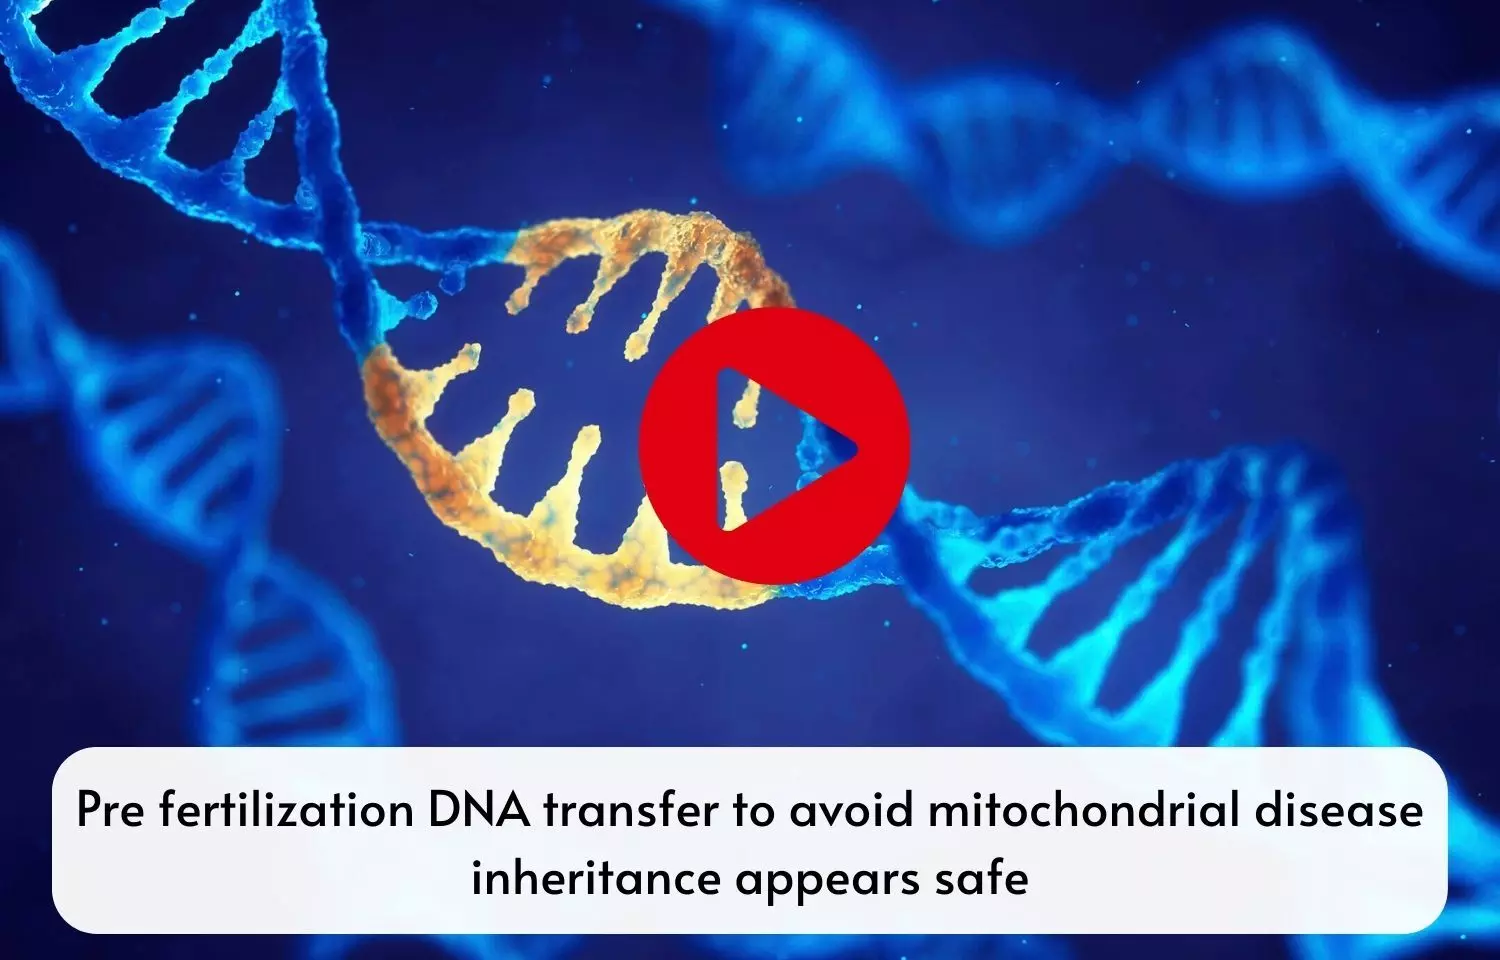 Pre fertilization DNA transfer to avoid mitochondrial disease inheritance appears safe